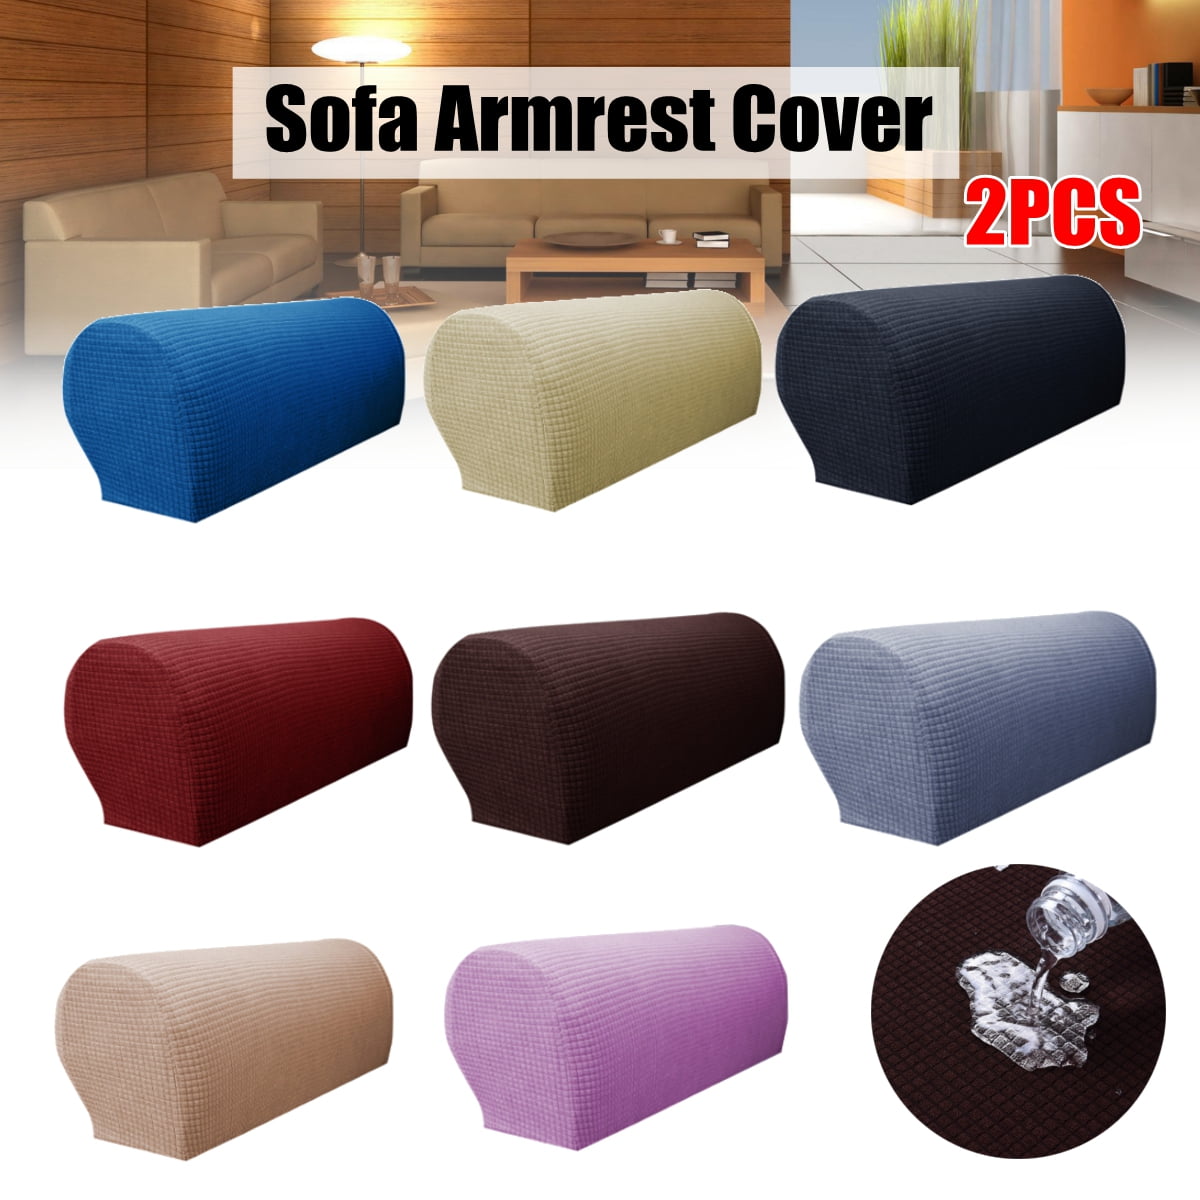 xiegons0 1 Pair Stretch Armrest Covers Polyester Arm Caps for Armchairs Sofa Chair Couch Stretchy Arm Slipcovers for Most Chairs and Sofas Furniture Protector 